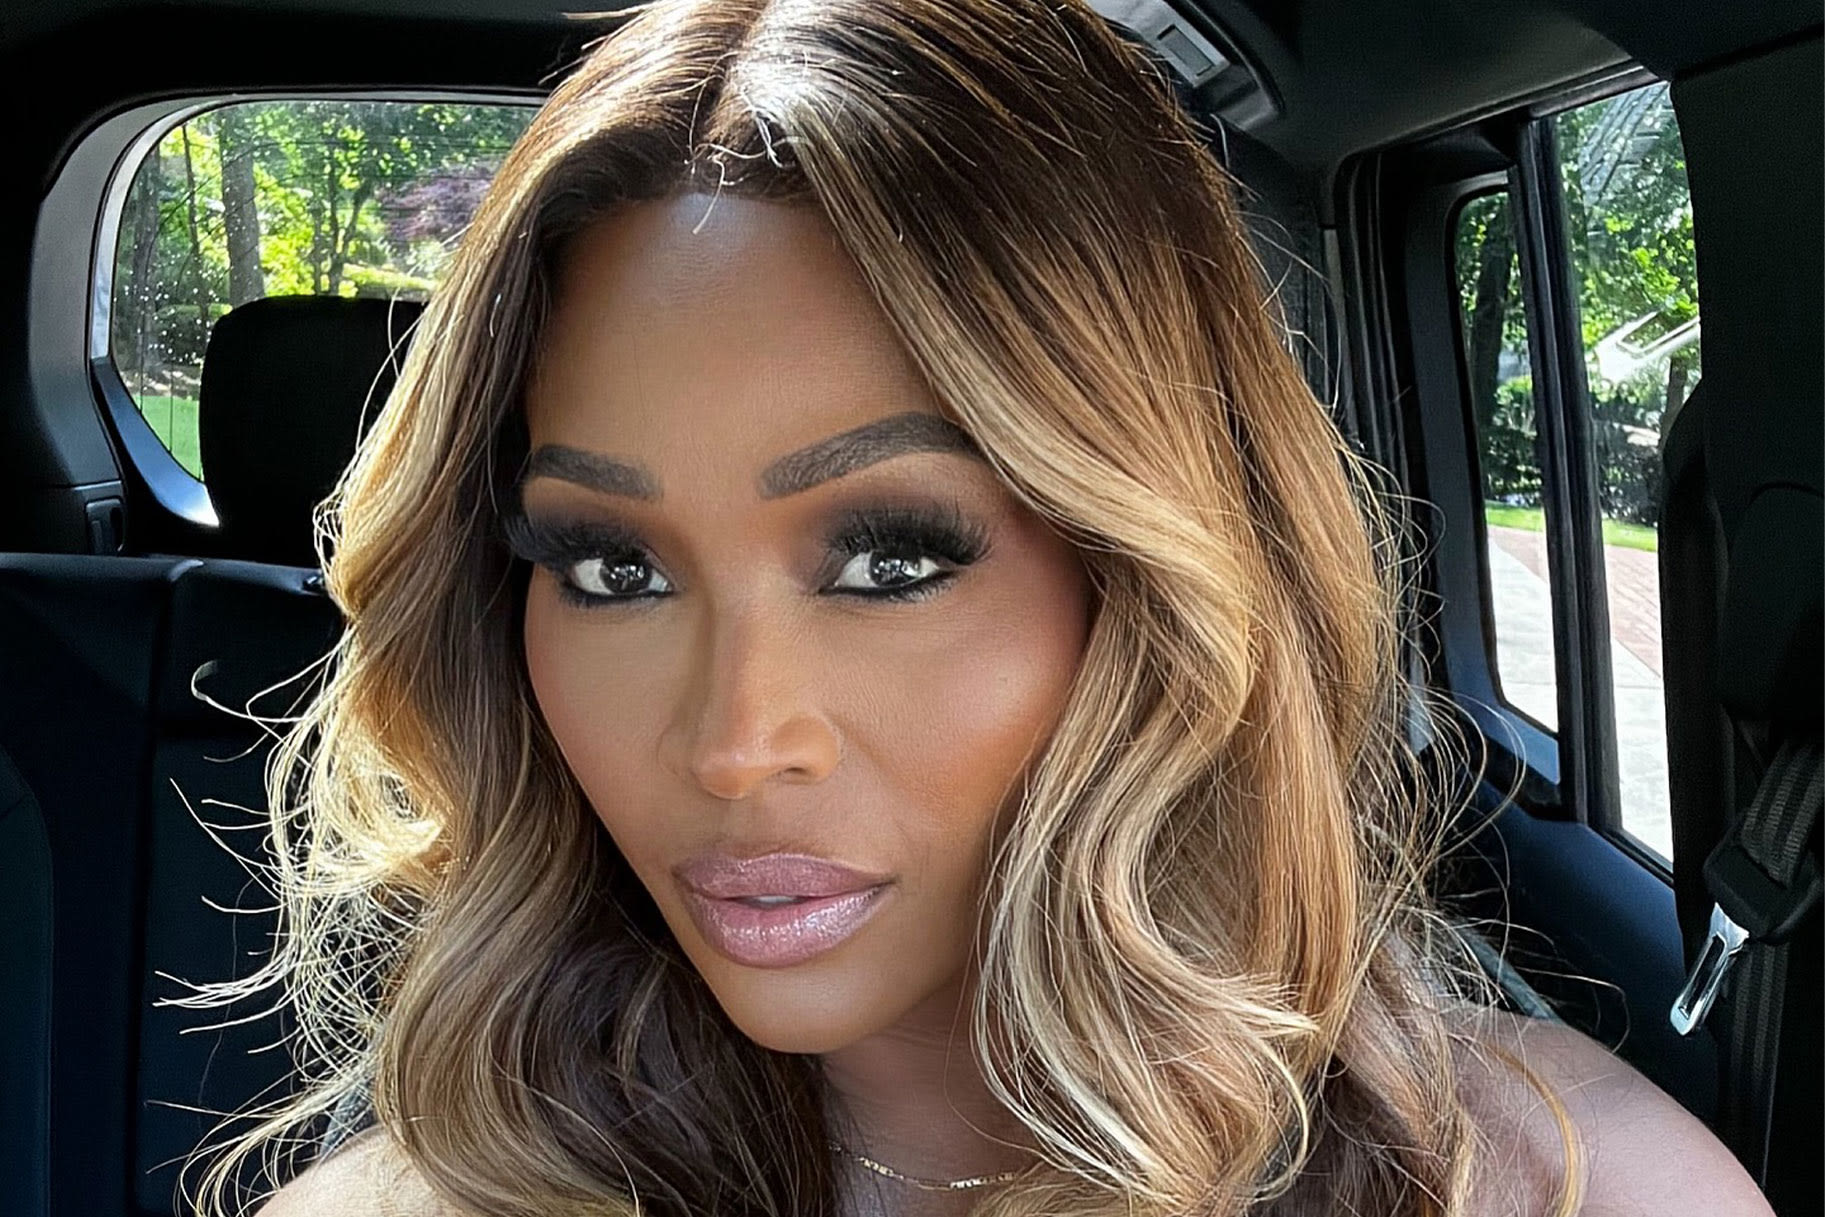 Cynthia Bailey Shares a "Curious" Development at Lake Bailey: "Wow" | Bravo TV Official Site